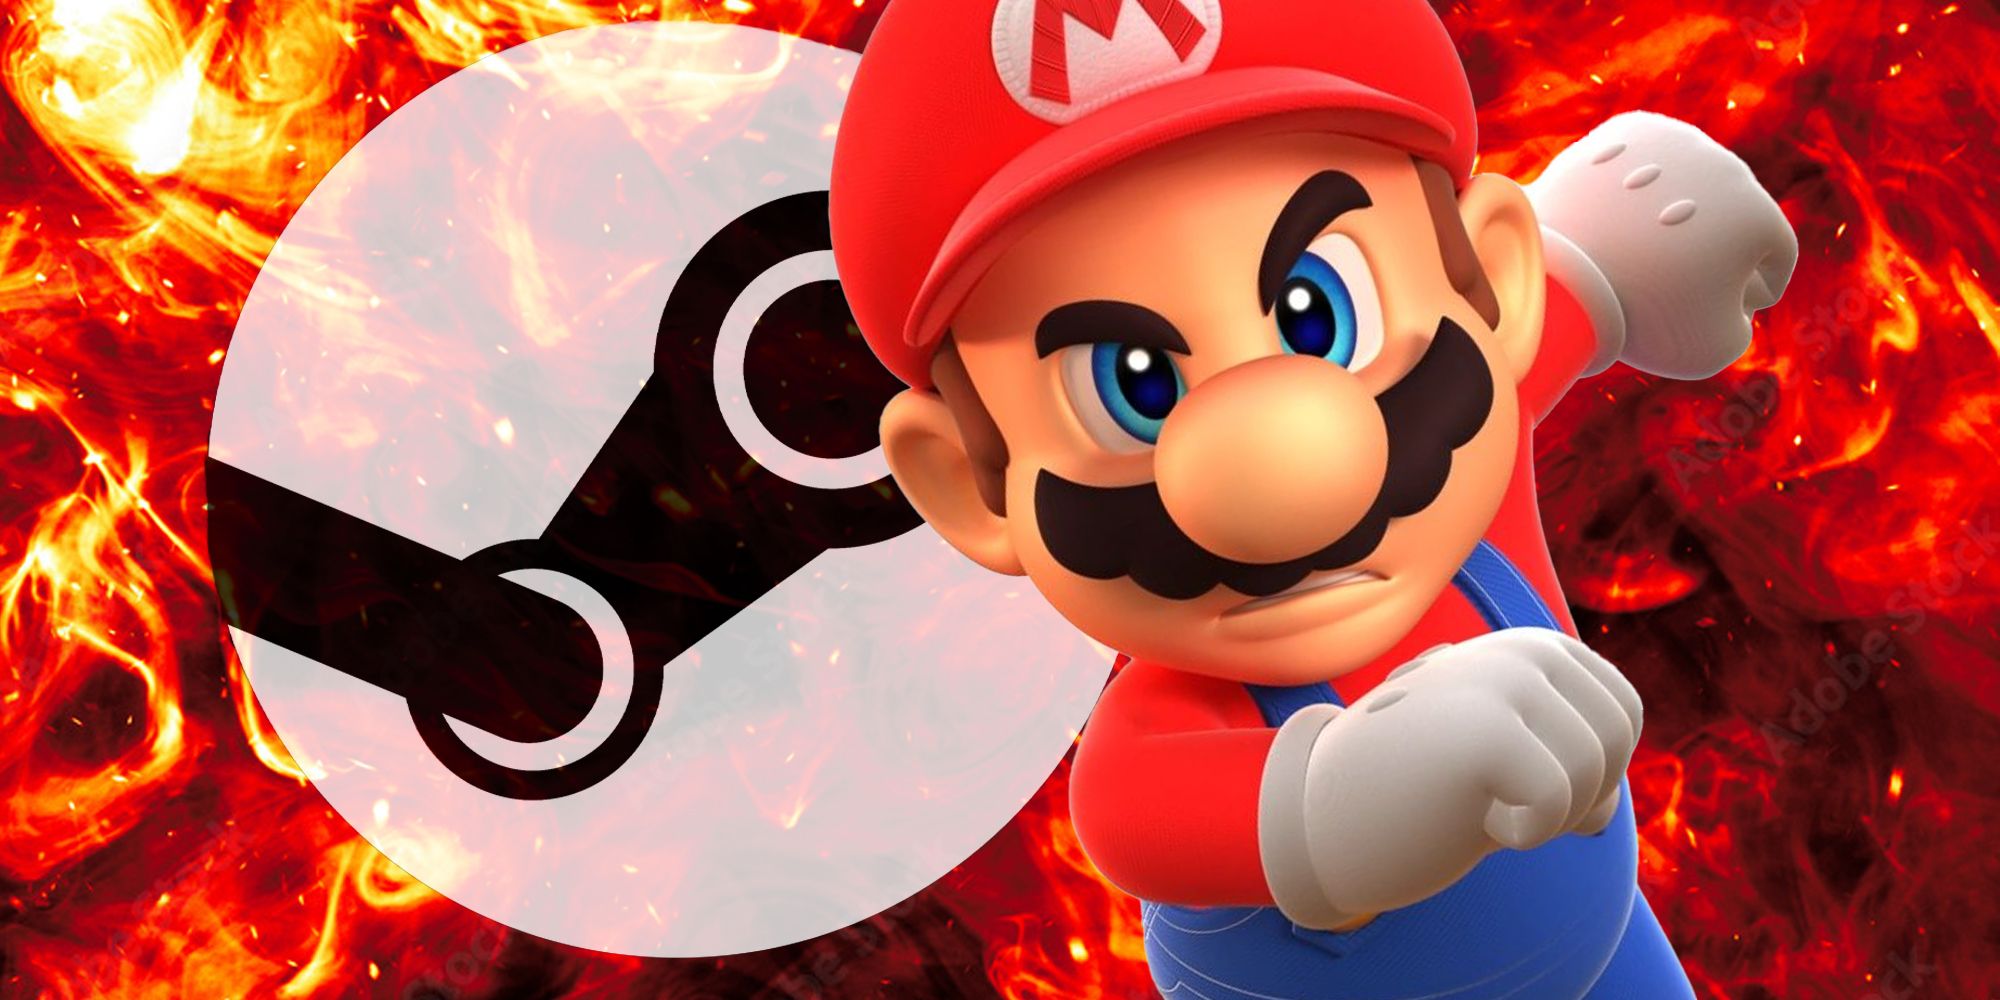 Mario and the Steam logo with a fiery background